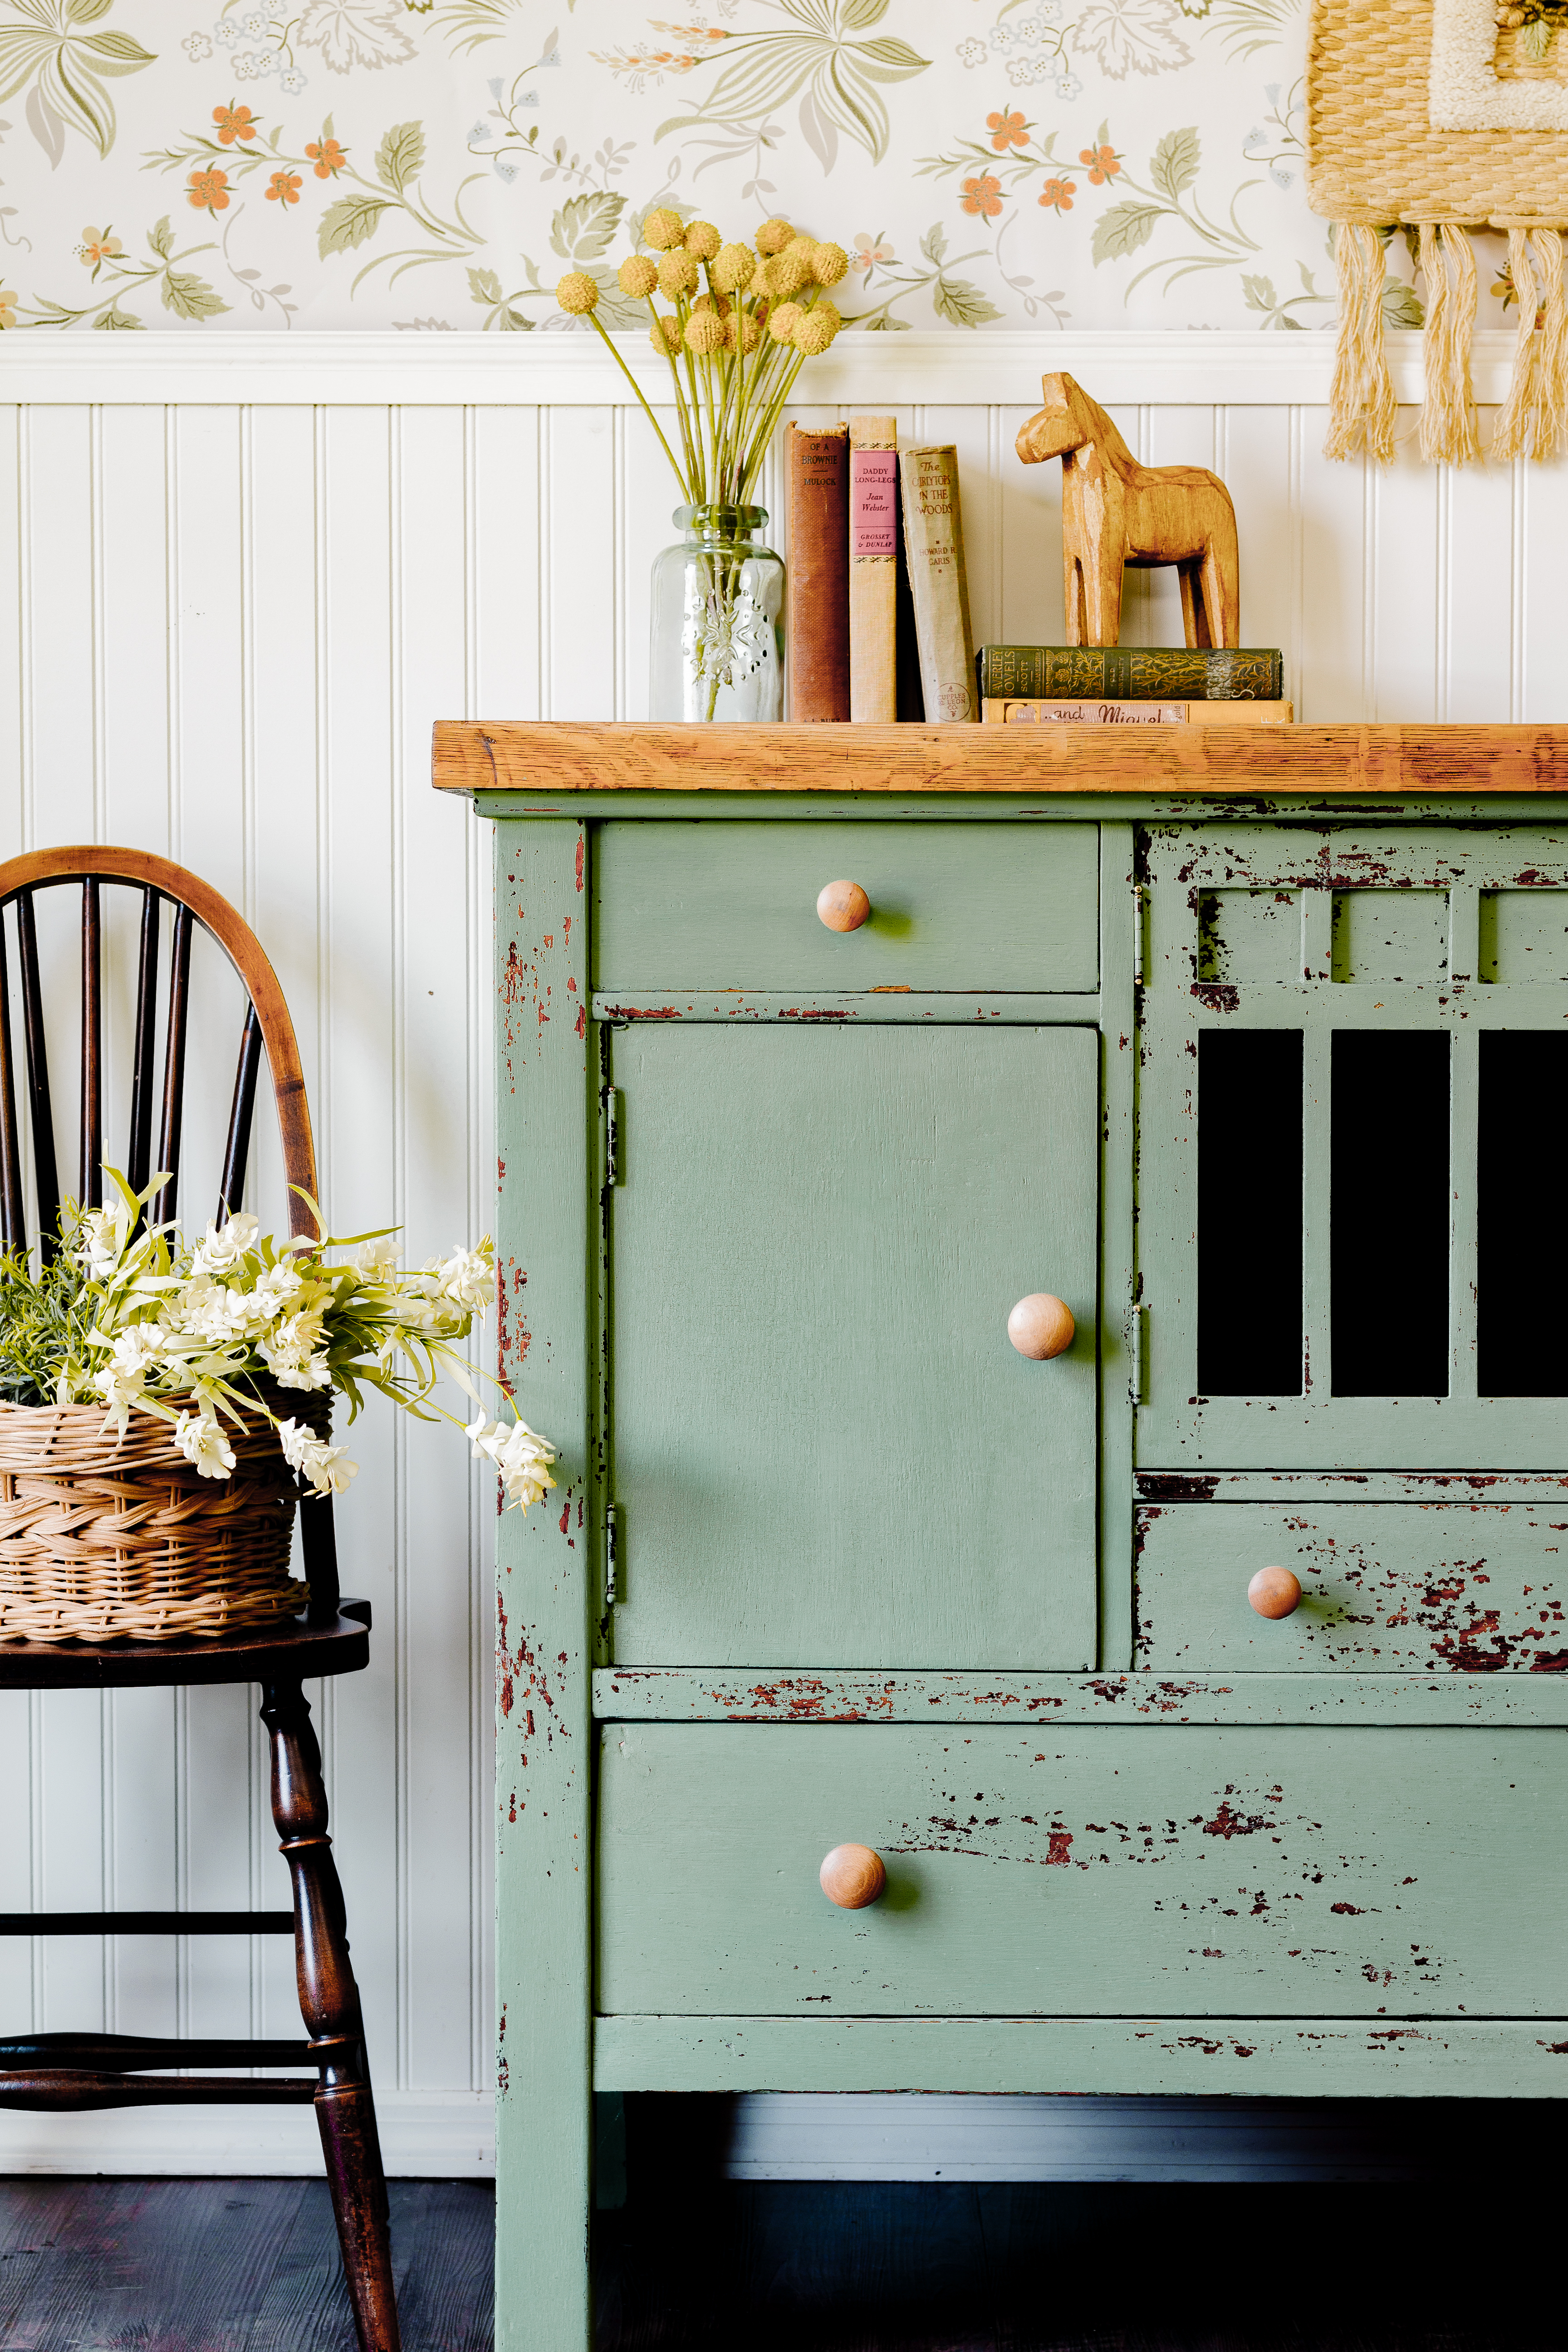 SAGE Soft and Natural Vintage Green Chalk Based Paint Furniture and DIY  Home Decor Projects 